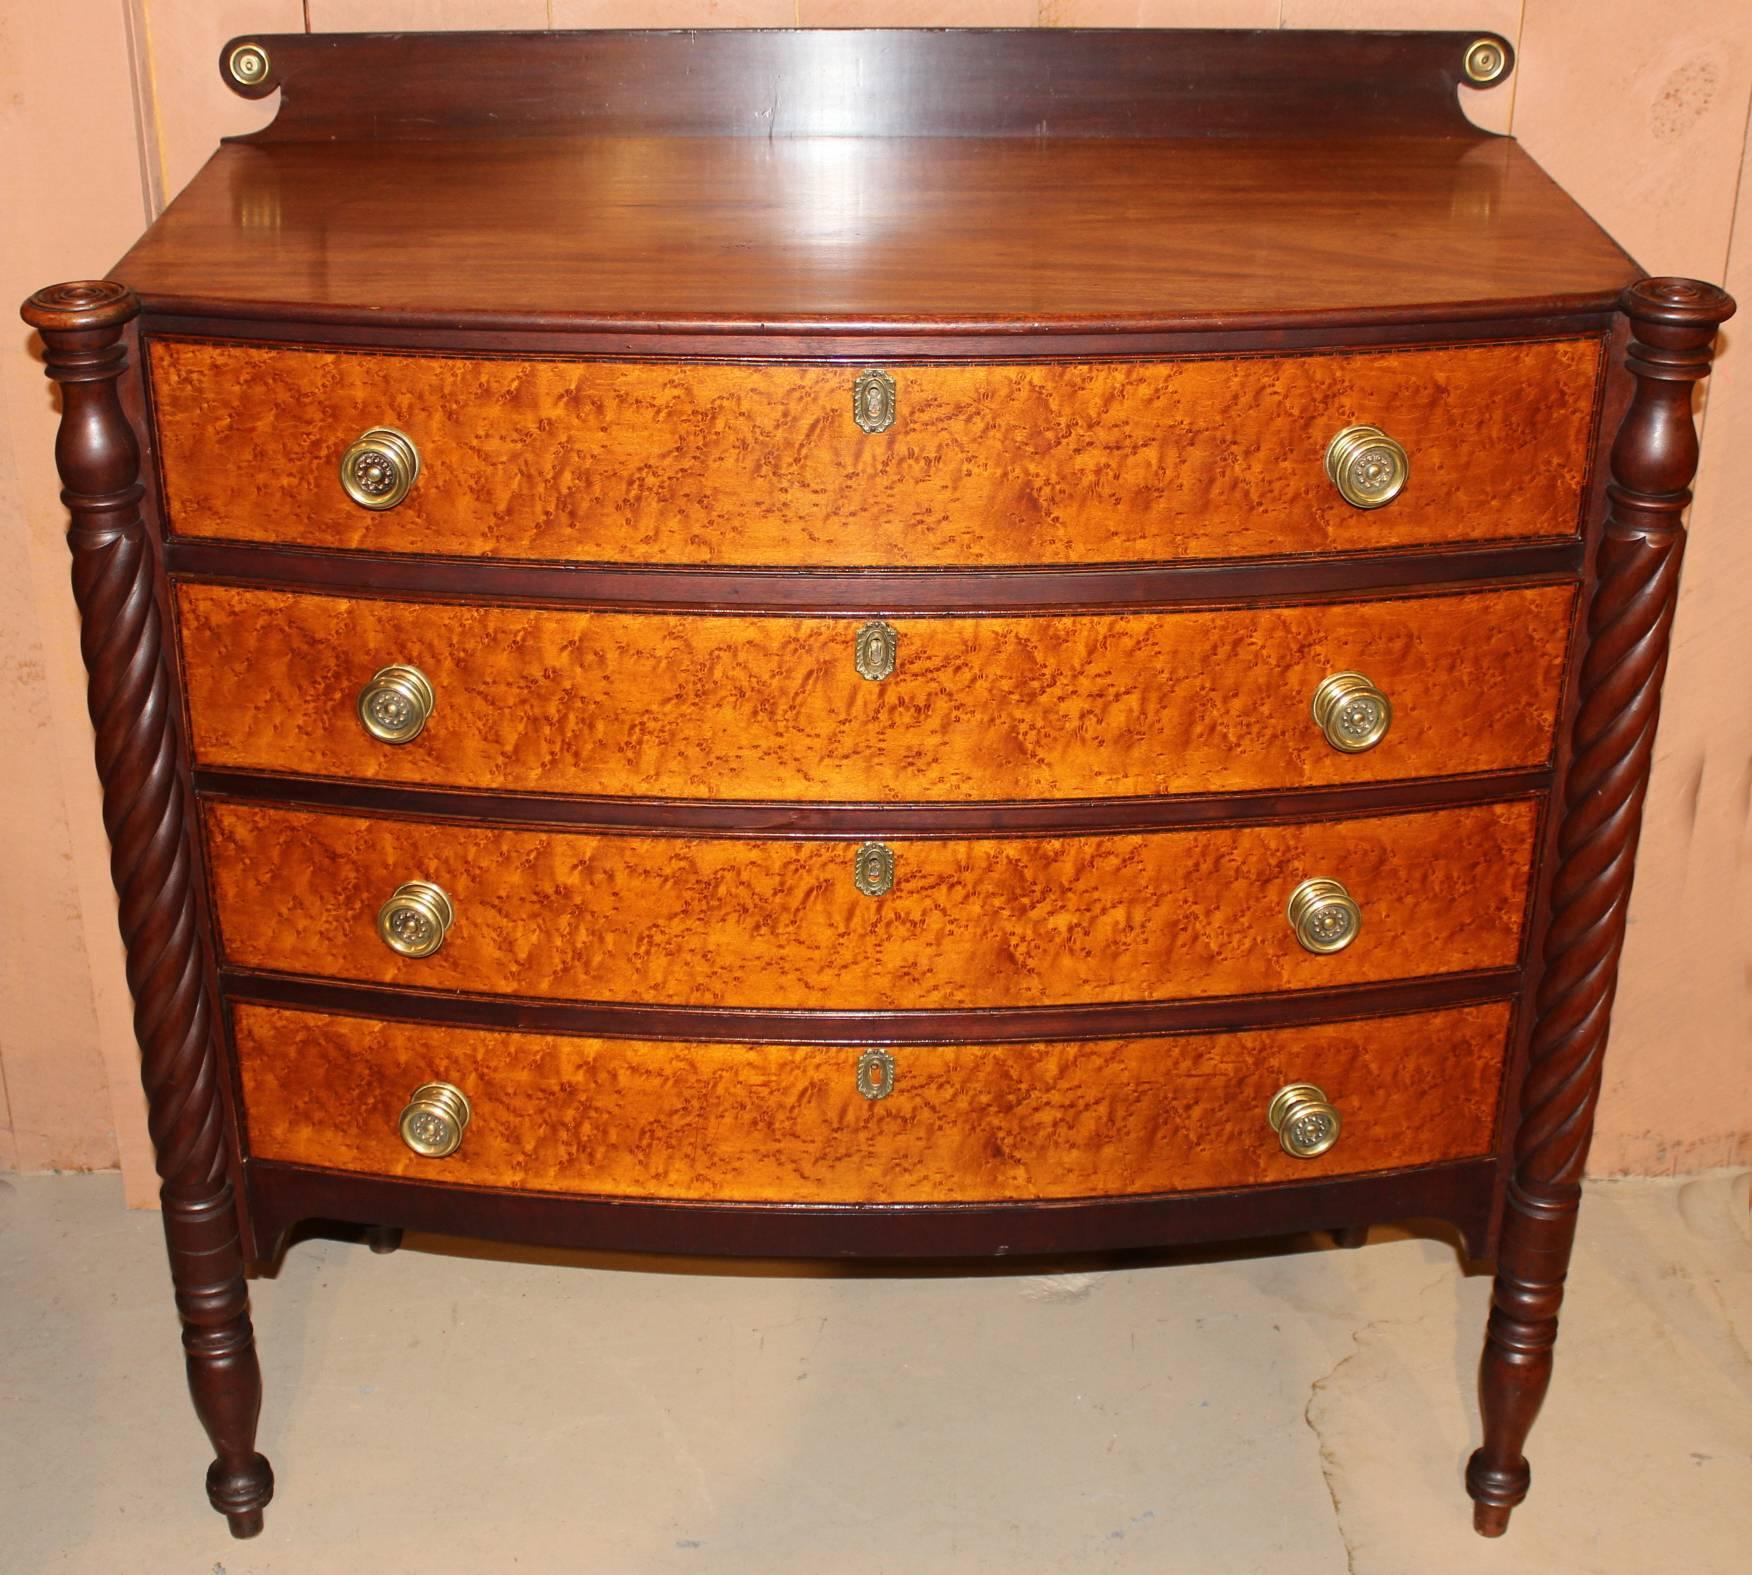 A splendid Federal Sheraton mahogany bow front chest with shaped backsplash with brass bulls eyes, a shaped top with turret corners over a conforming case with four graduated drawers, each with bird's-eye maple cockbeaded drawer fronts, flanked by